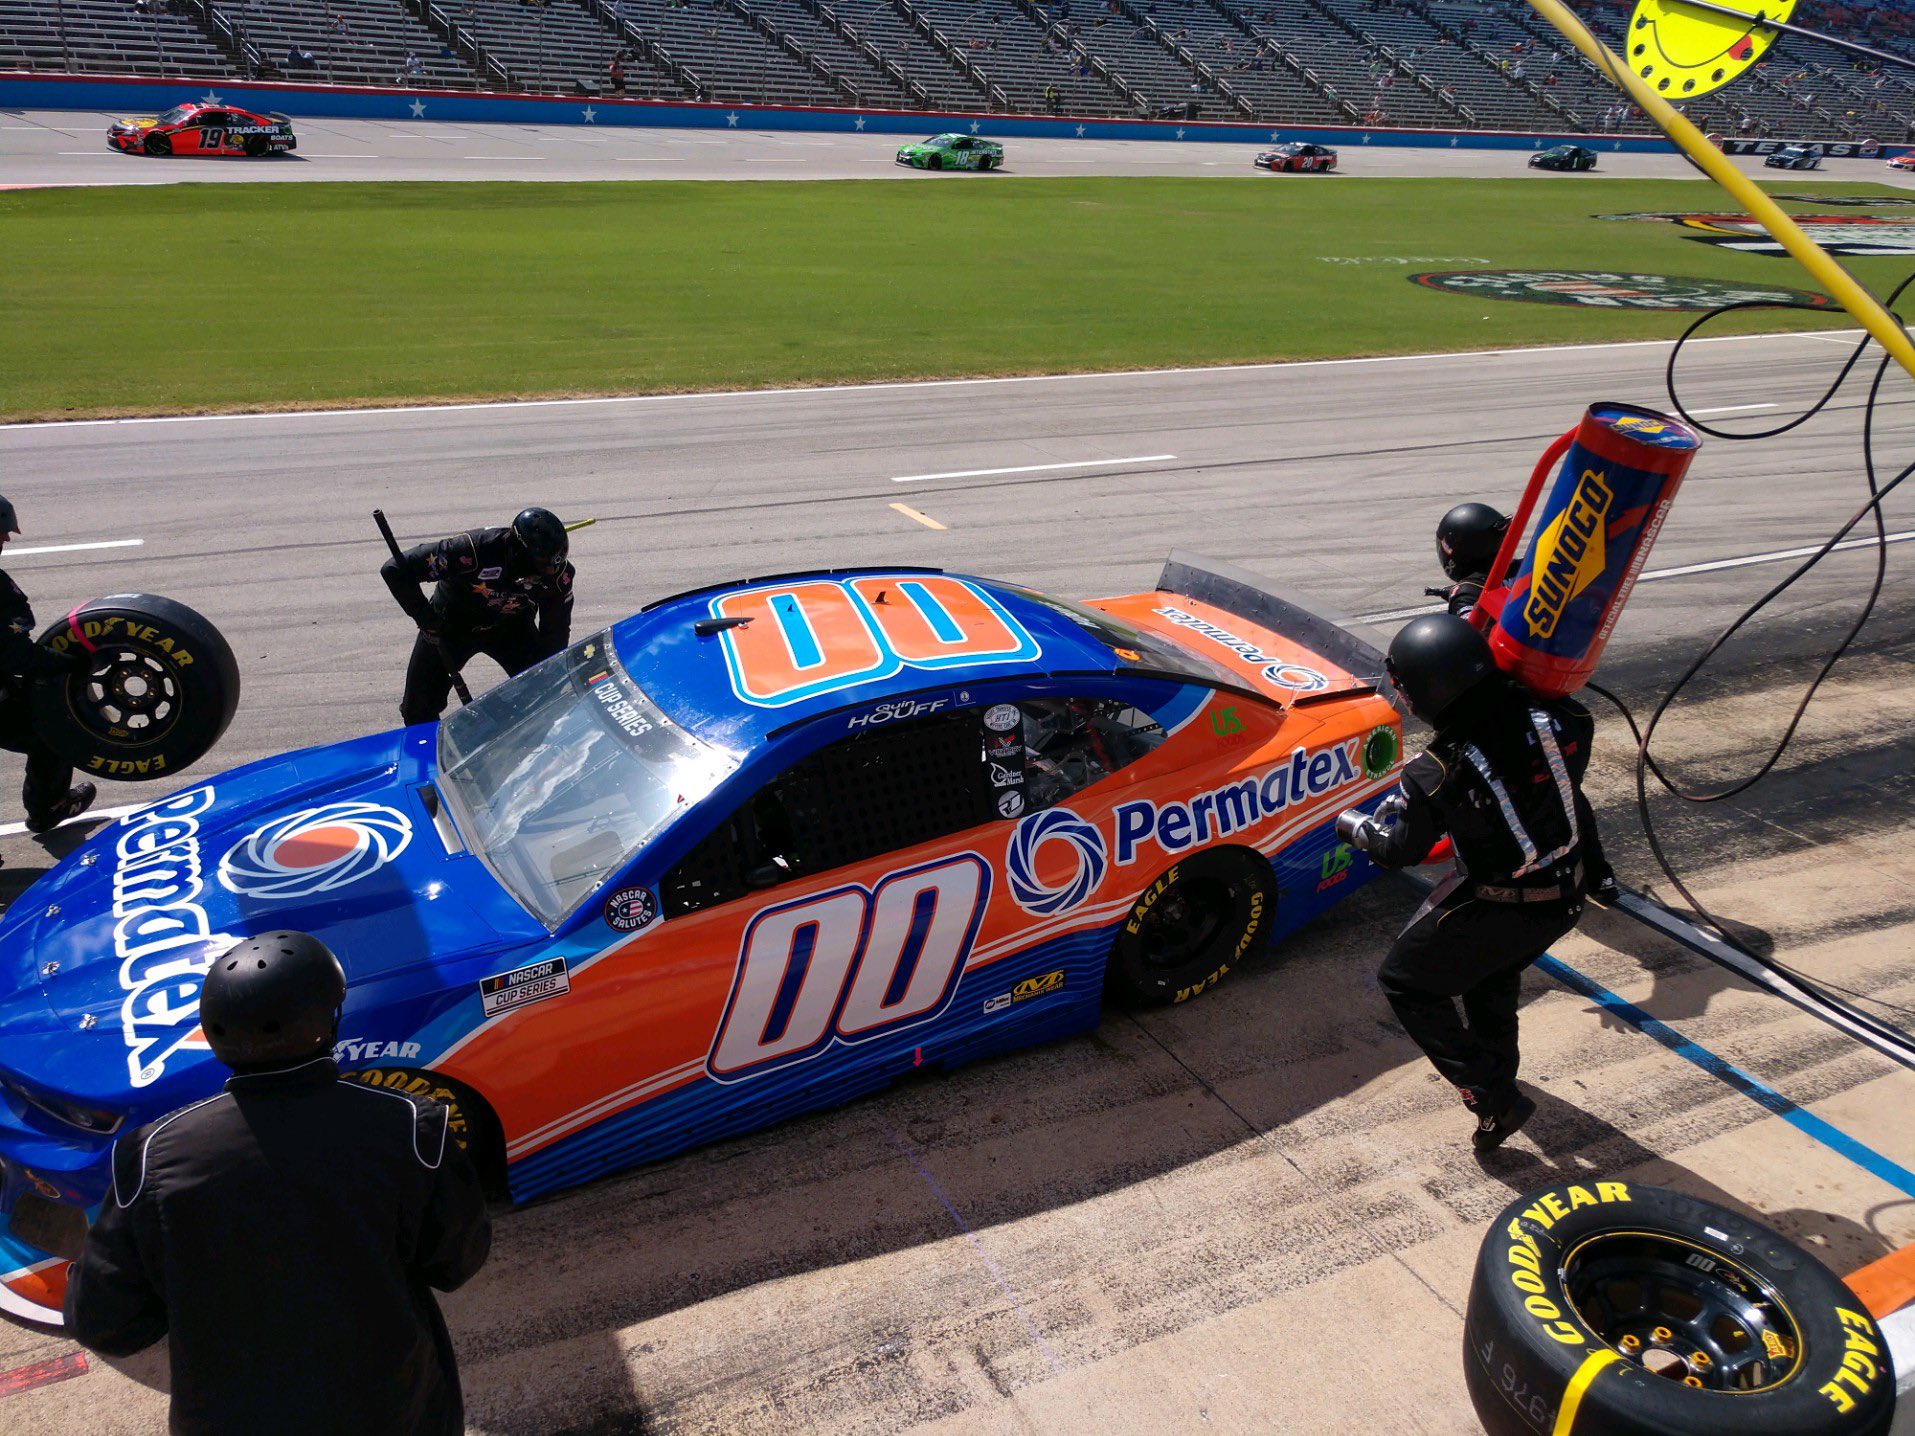 Quin Houff's crew hard at work during a pit stop at Texas Motor Speedway. (Image Credit: StarCom Racing social media)